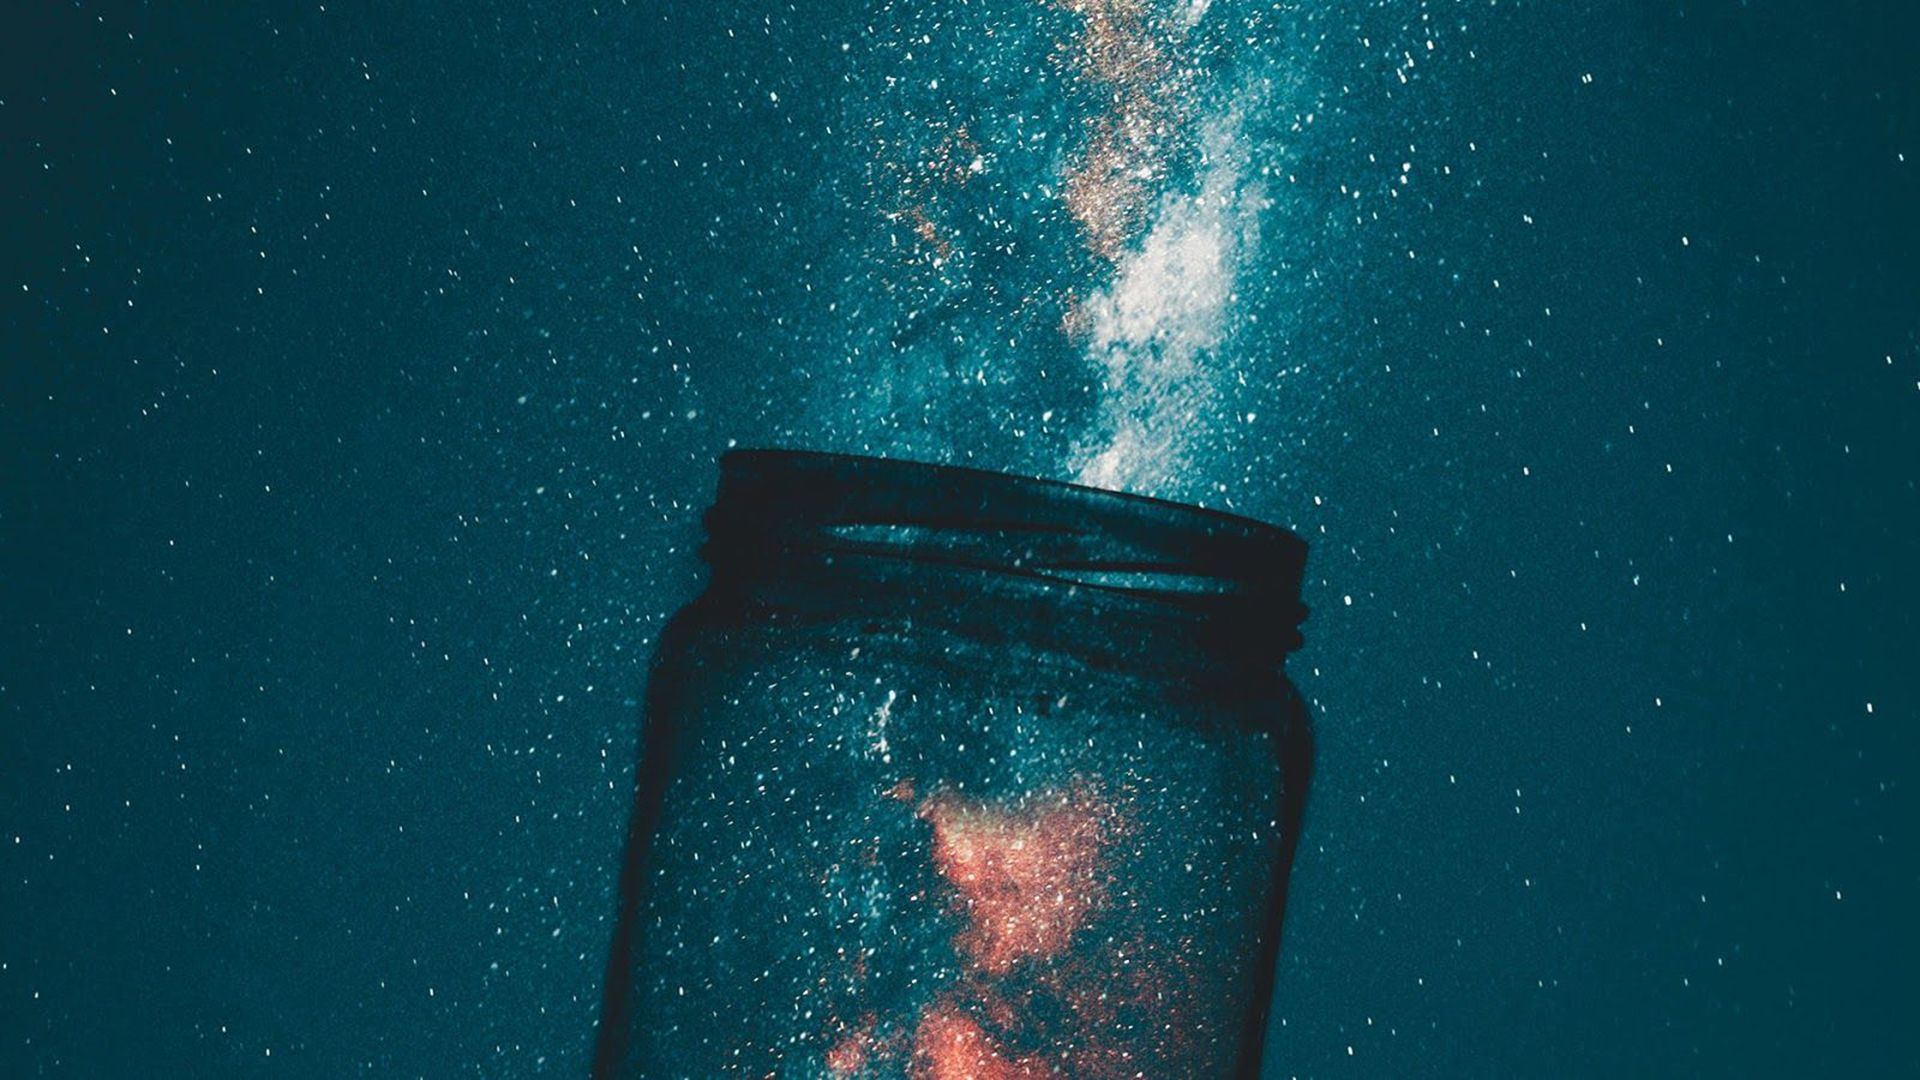 A jar filled with stars and the milky way - Chromebook, beautiful, space